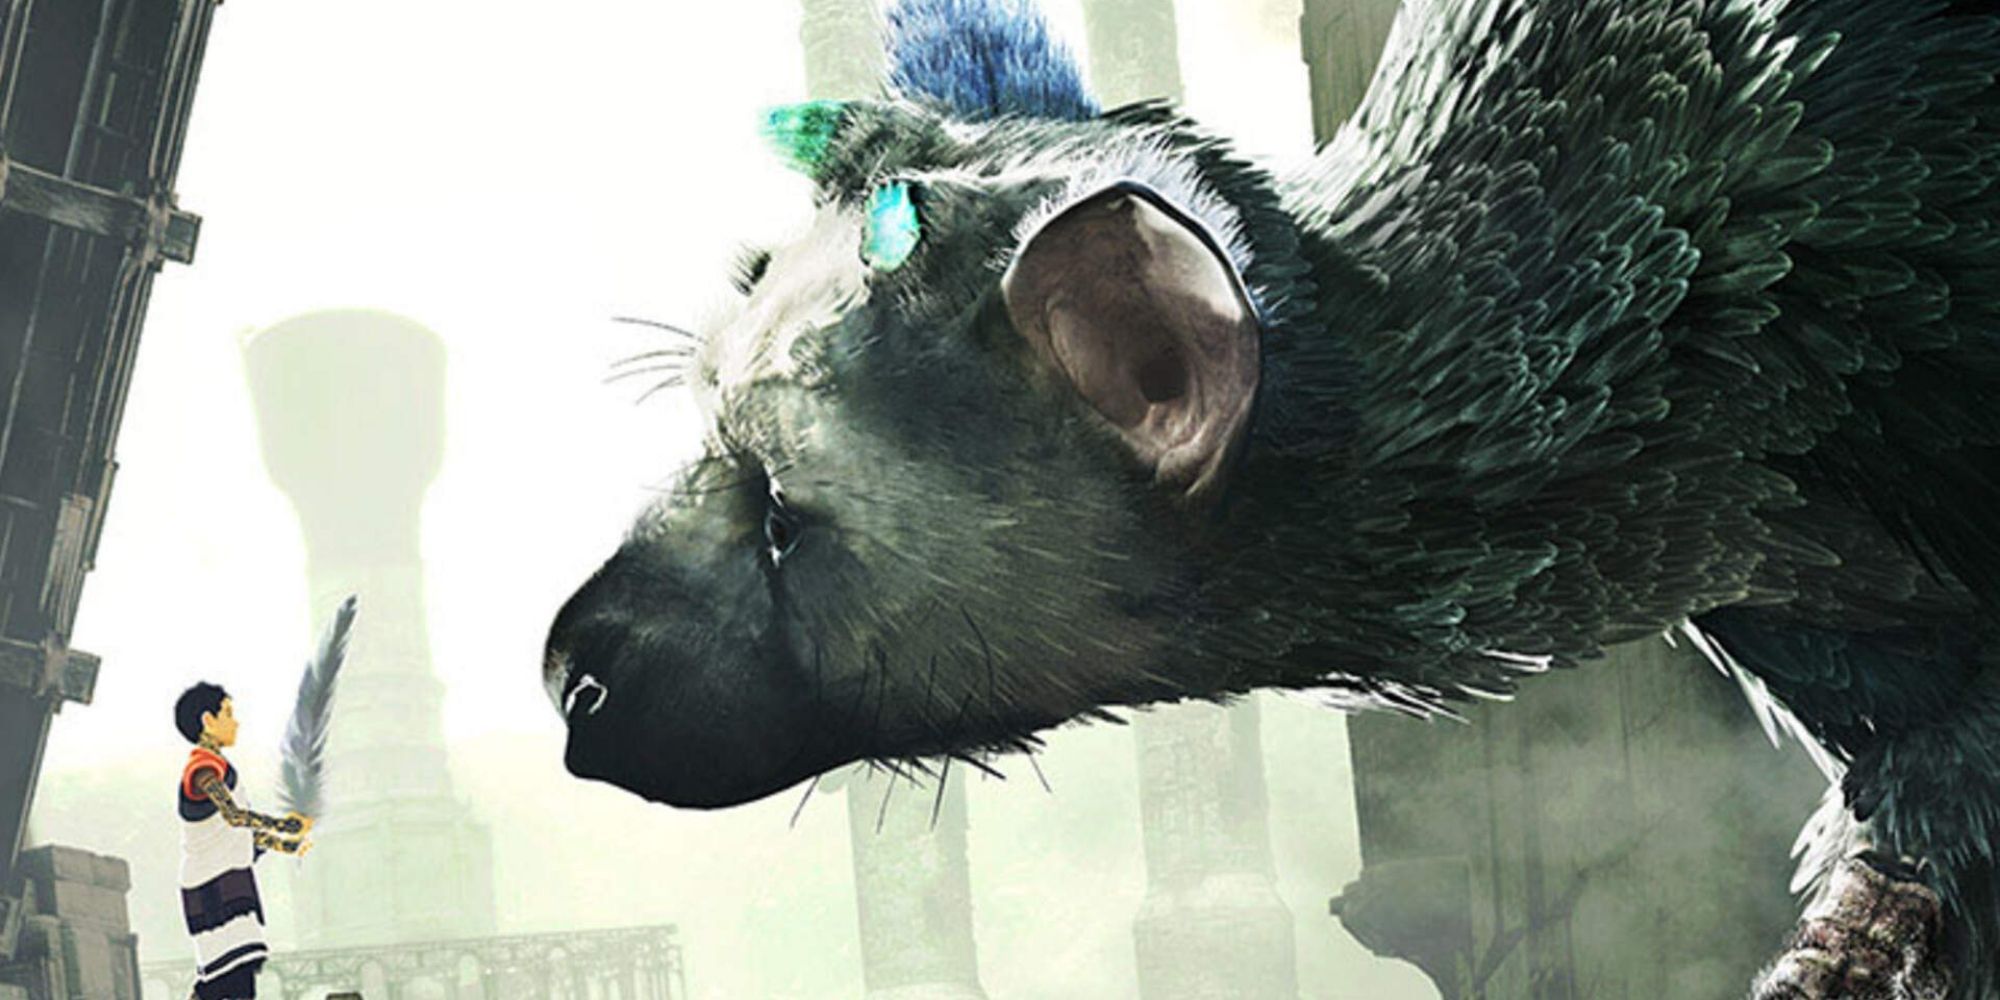 The Last Guardian Trico Leans Towards The Boy Who Is Holding A Feather Outside